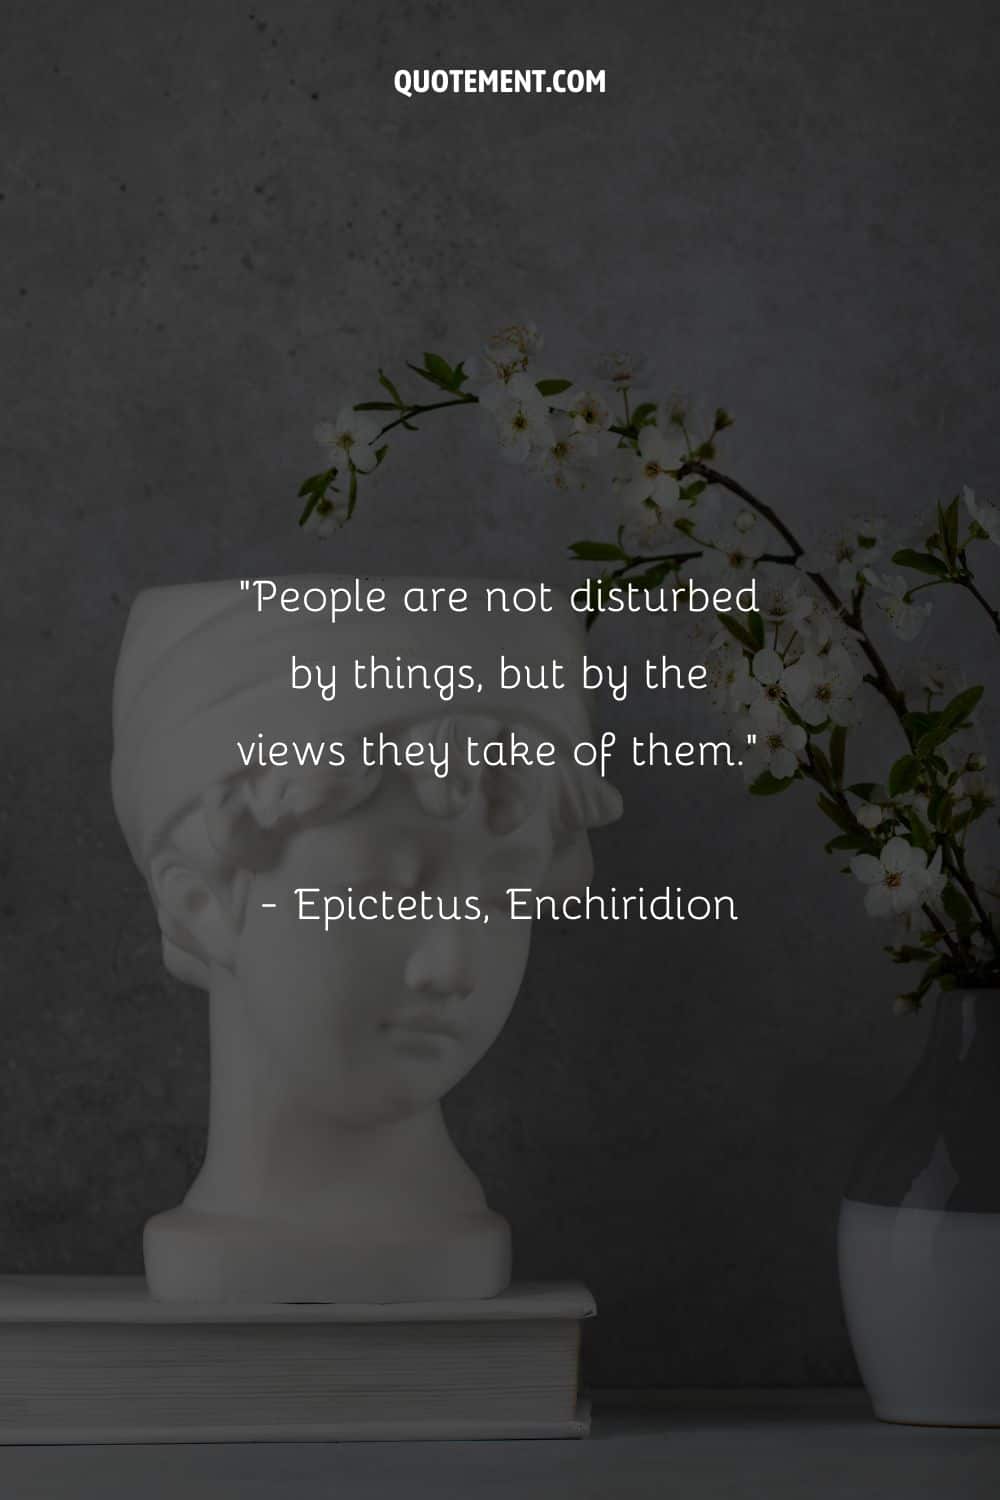 People are not disturbed by things, but by the views they take of them